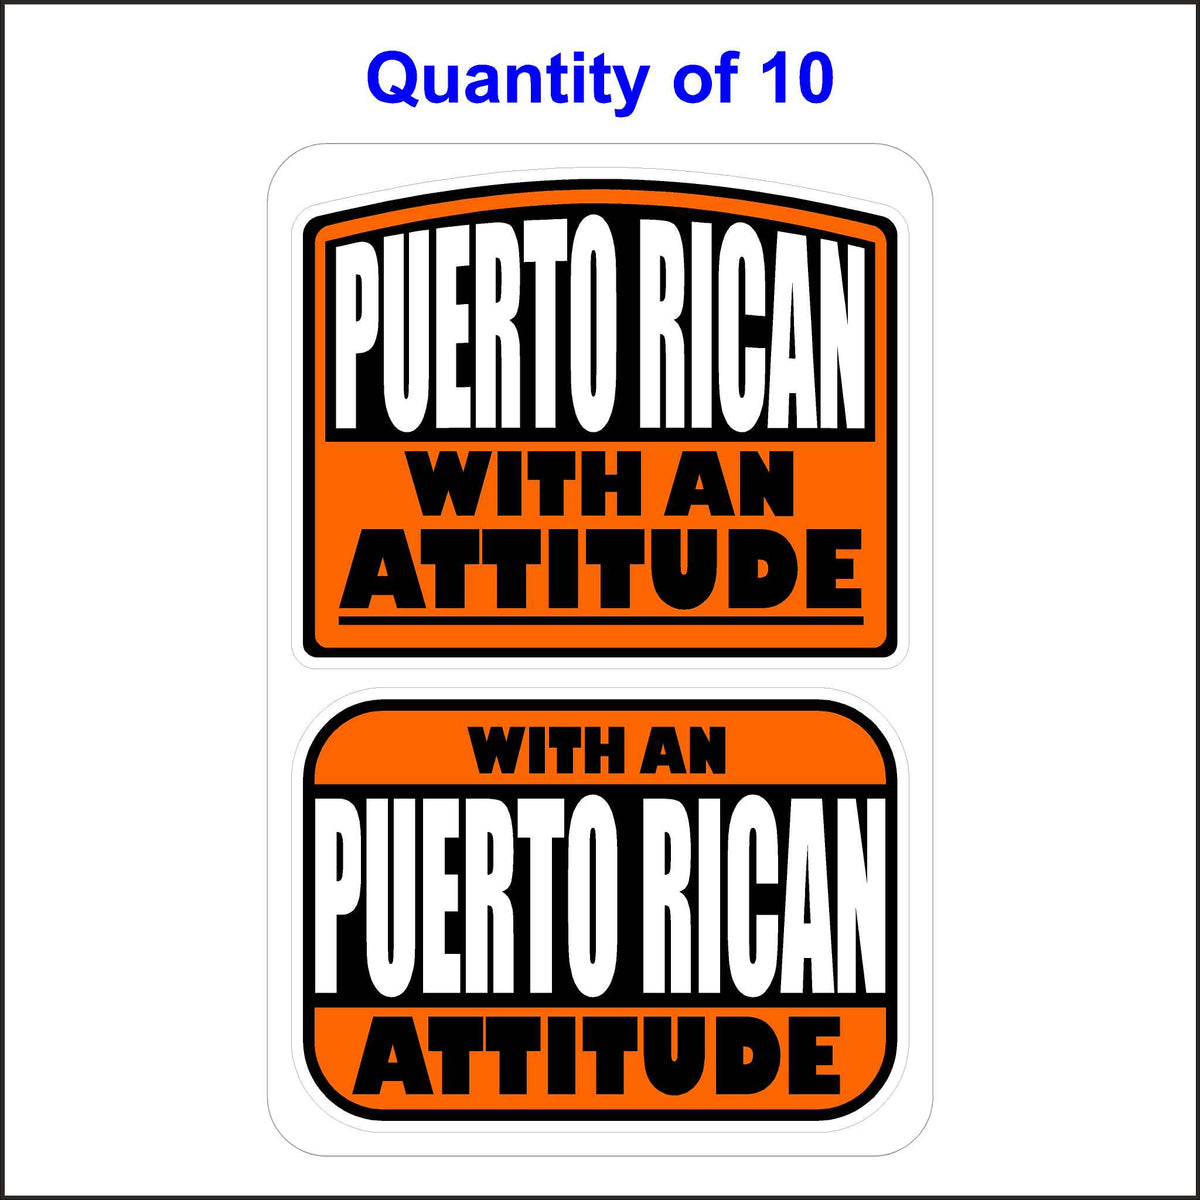 Puerto Rican With an Attitude Stickers 10 Quantity.